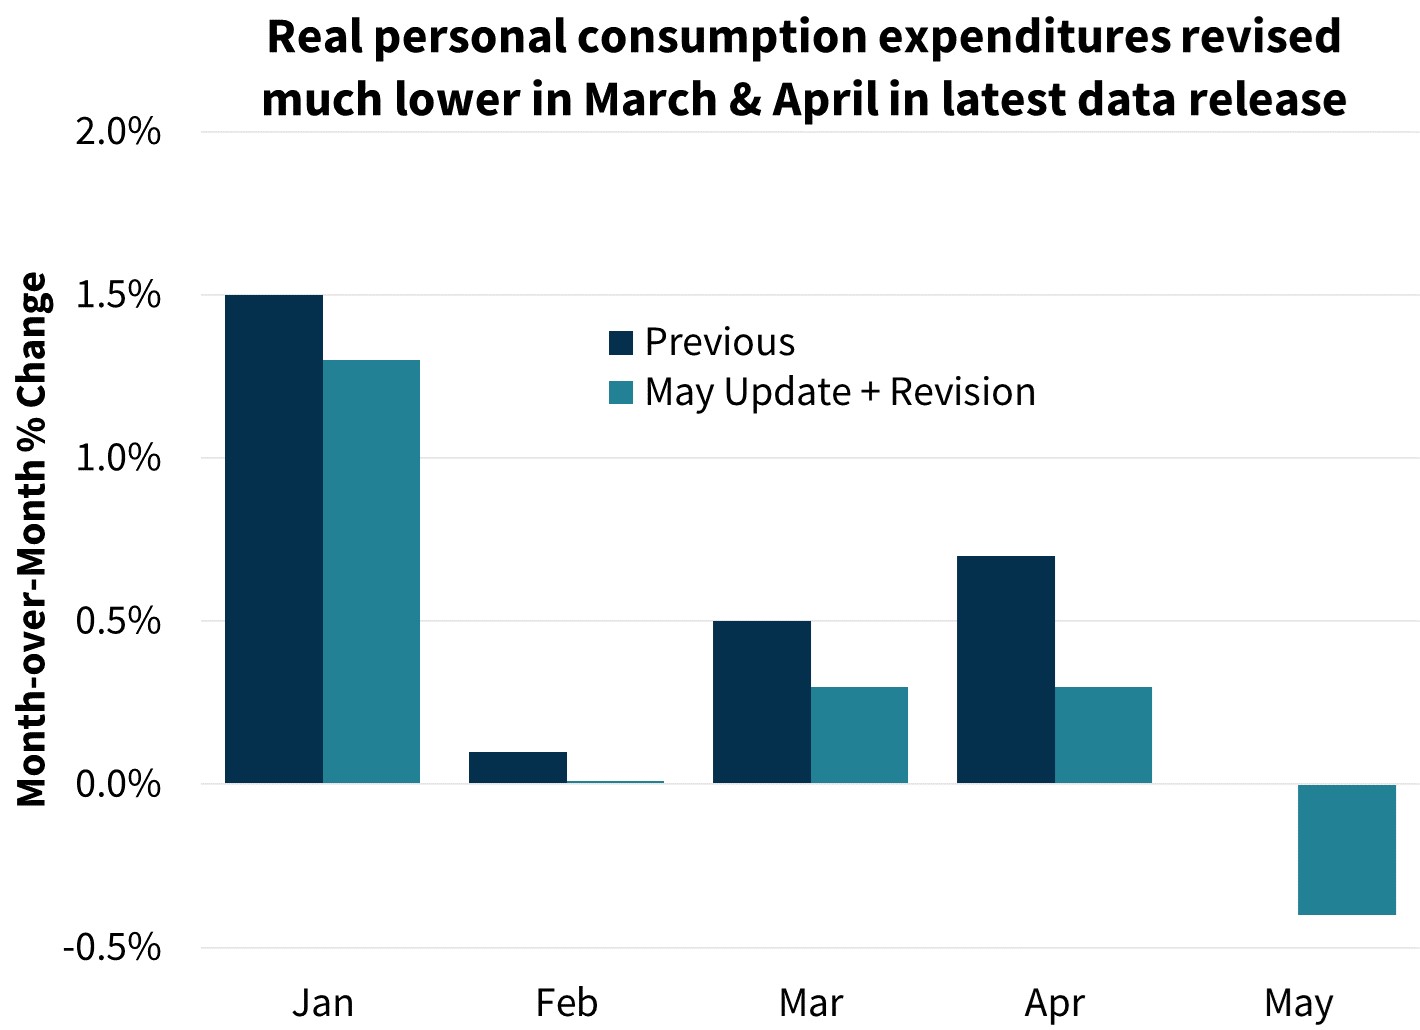 Real personal consumption expenditures revised much lower in March & April in latest data release 